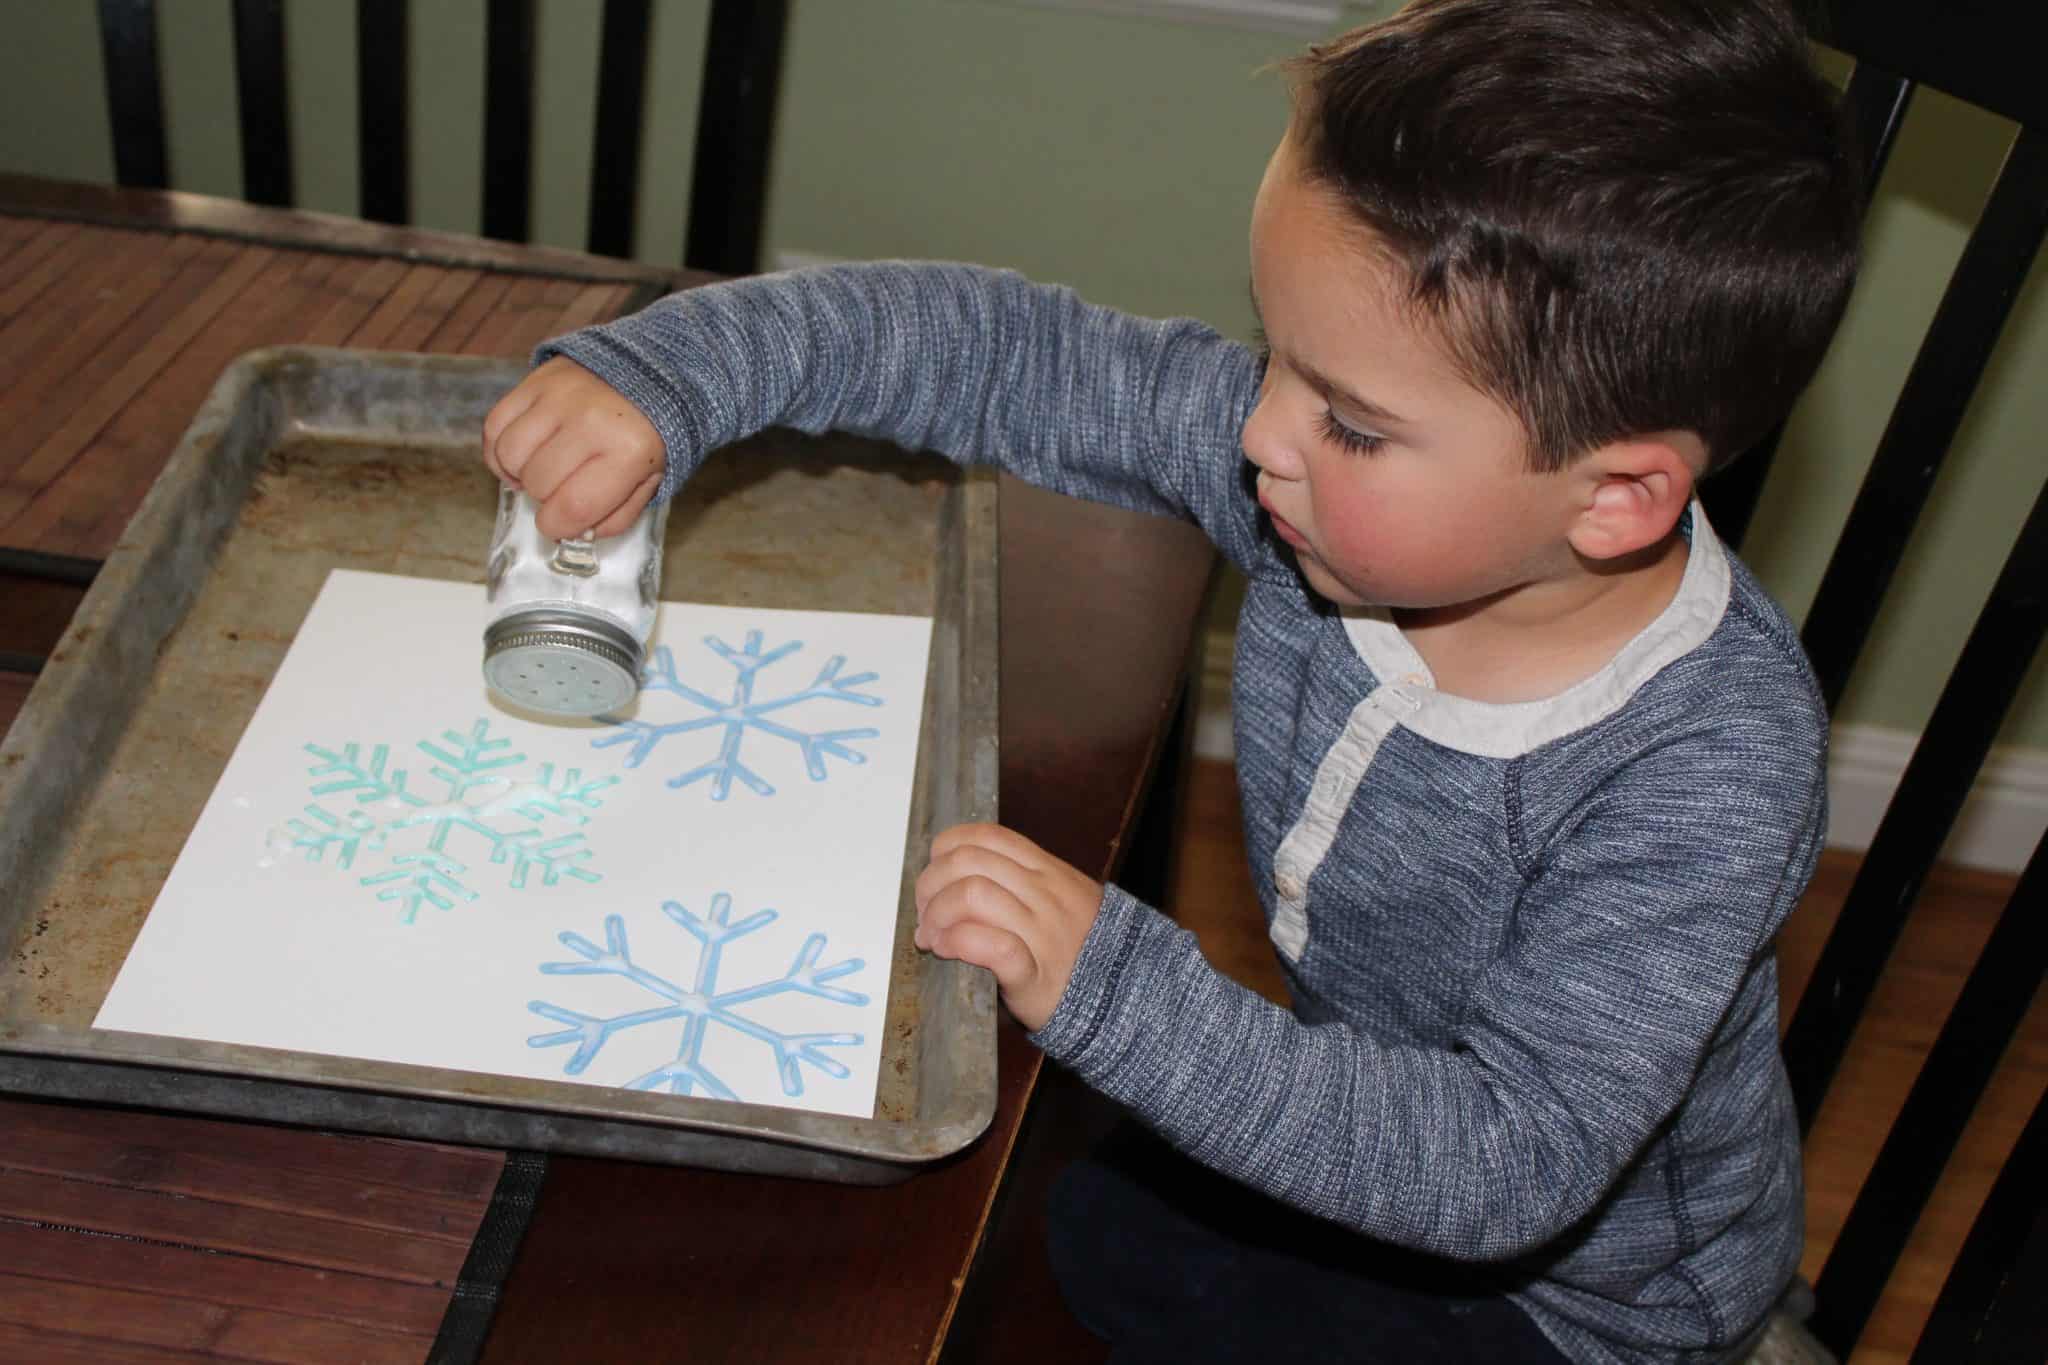 Toddler using salt shaker to cover the glued snowflake template.